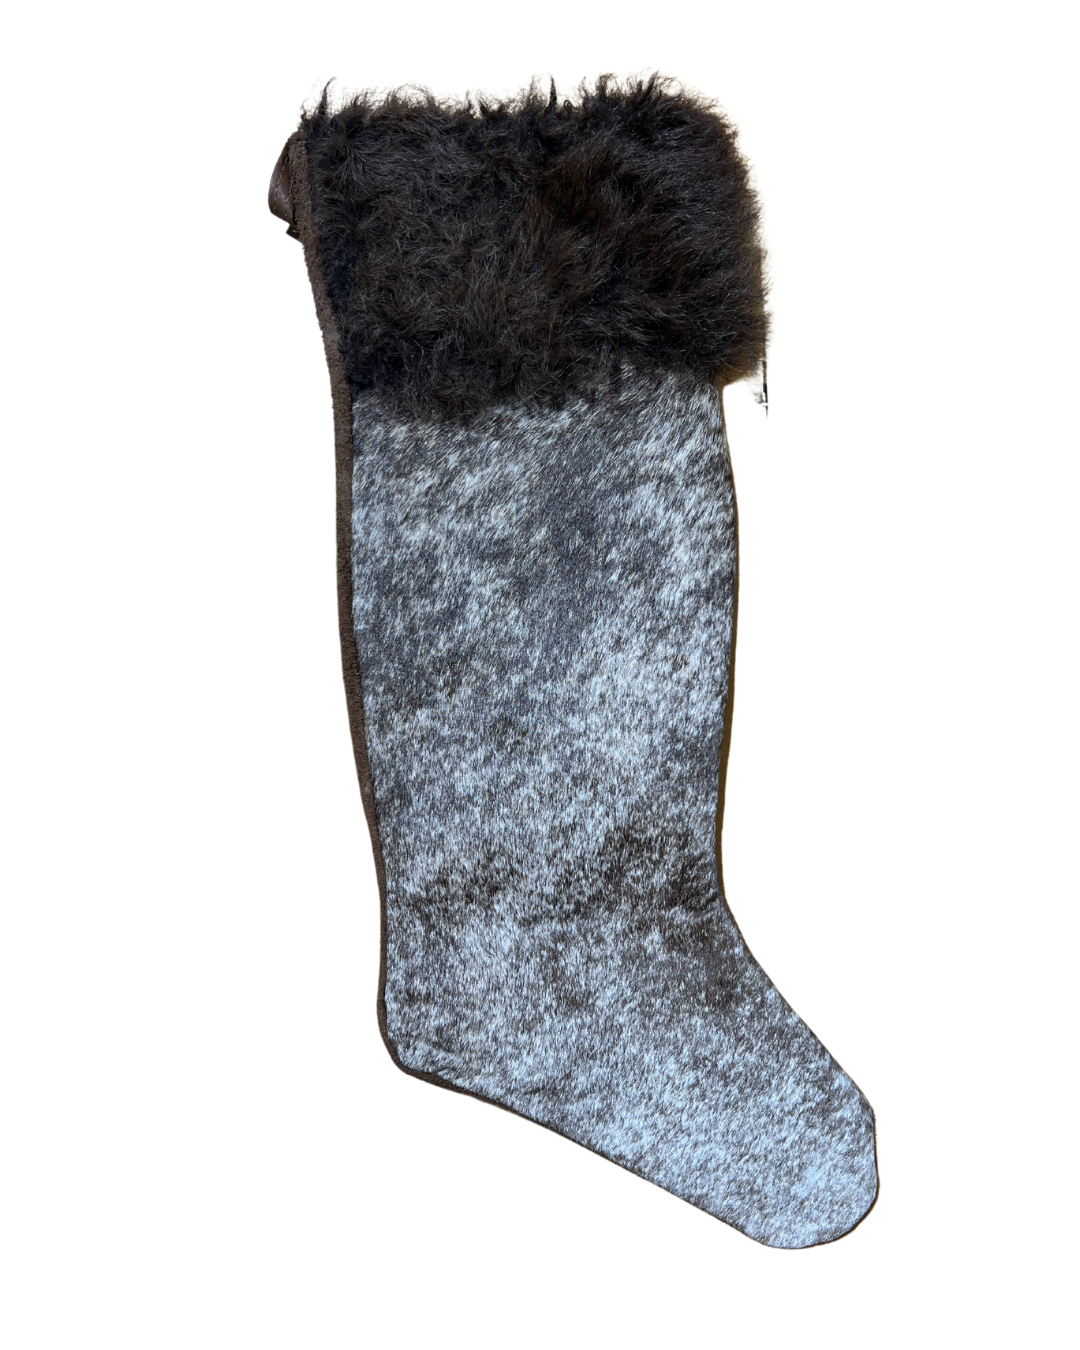 Cowhide Christmas Stocking - Brindle & with Bison Hair - Large